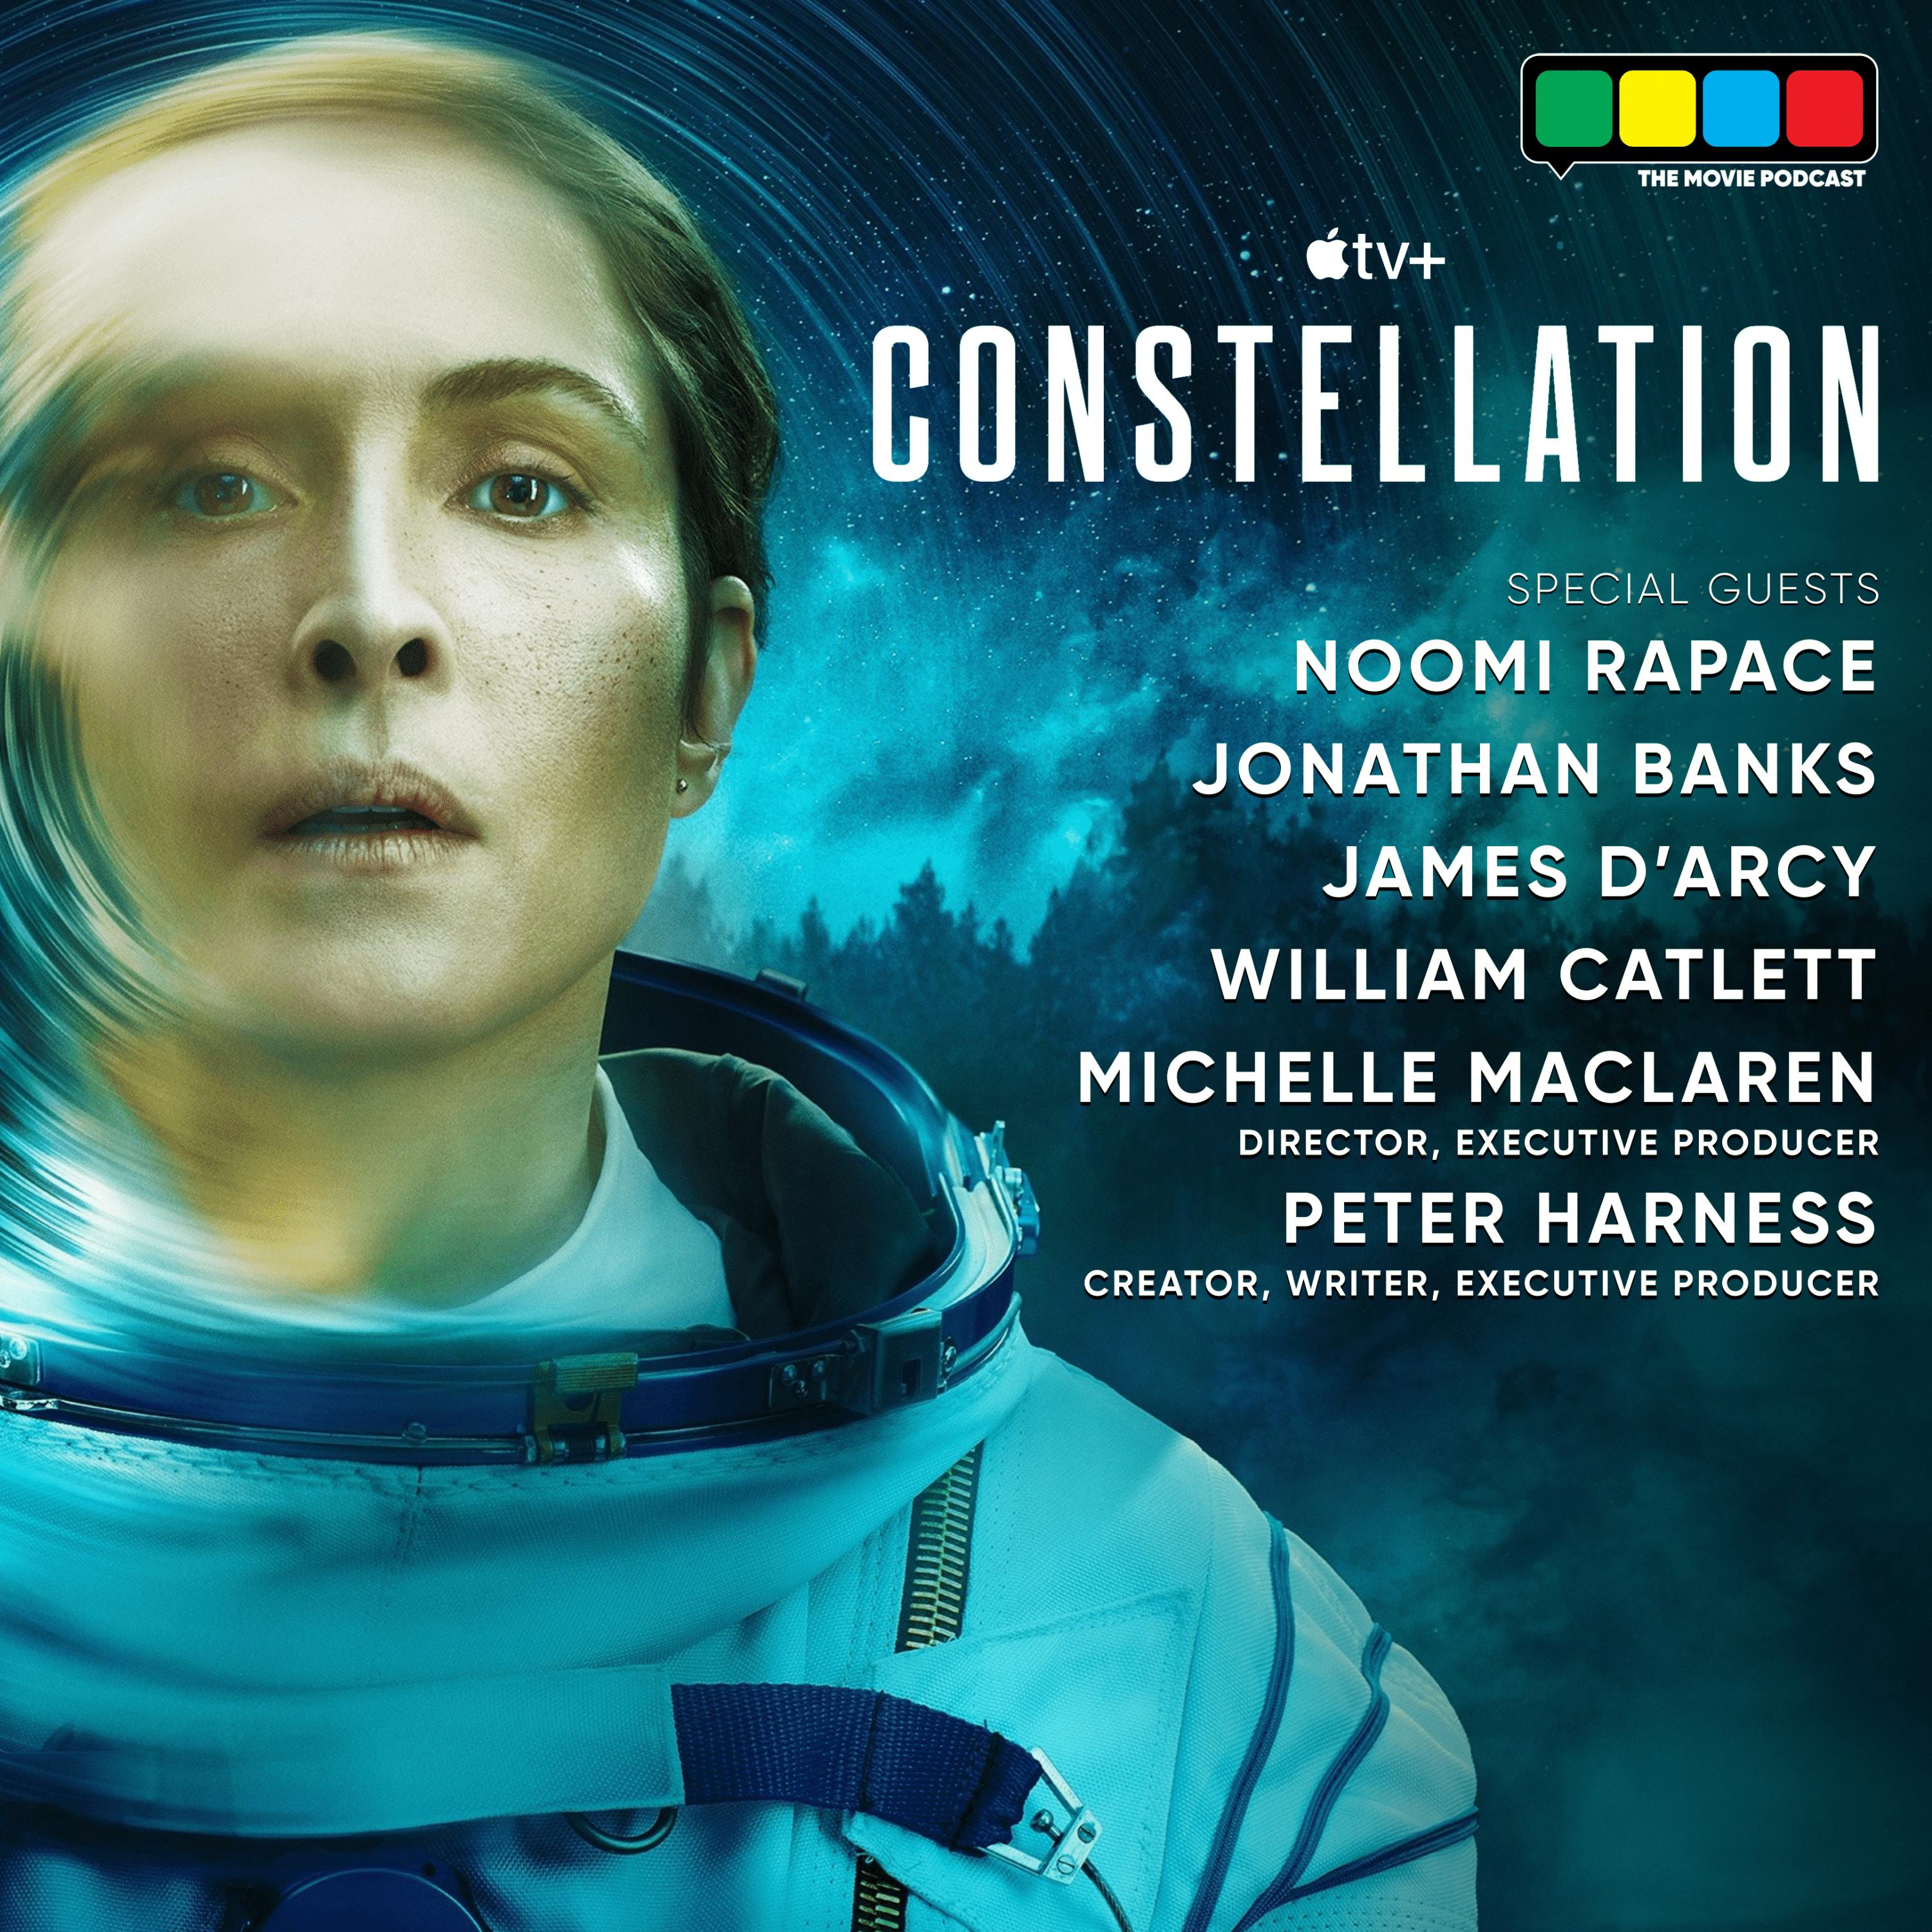 Constellation Interview with Noomi Rapace, Jonathan Banks, James D’Arcy, William Catlett, Michelle MacLaren, and Peter Harness (Apple TV+)